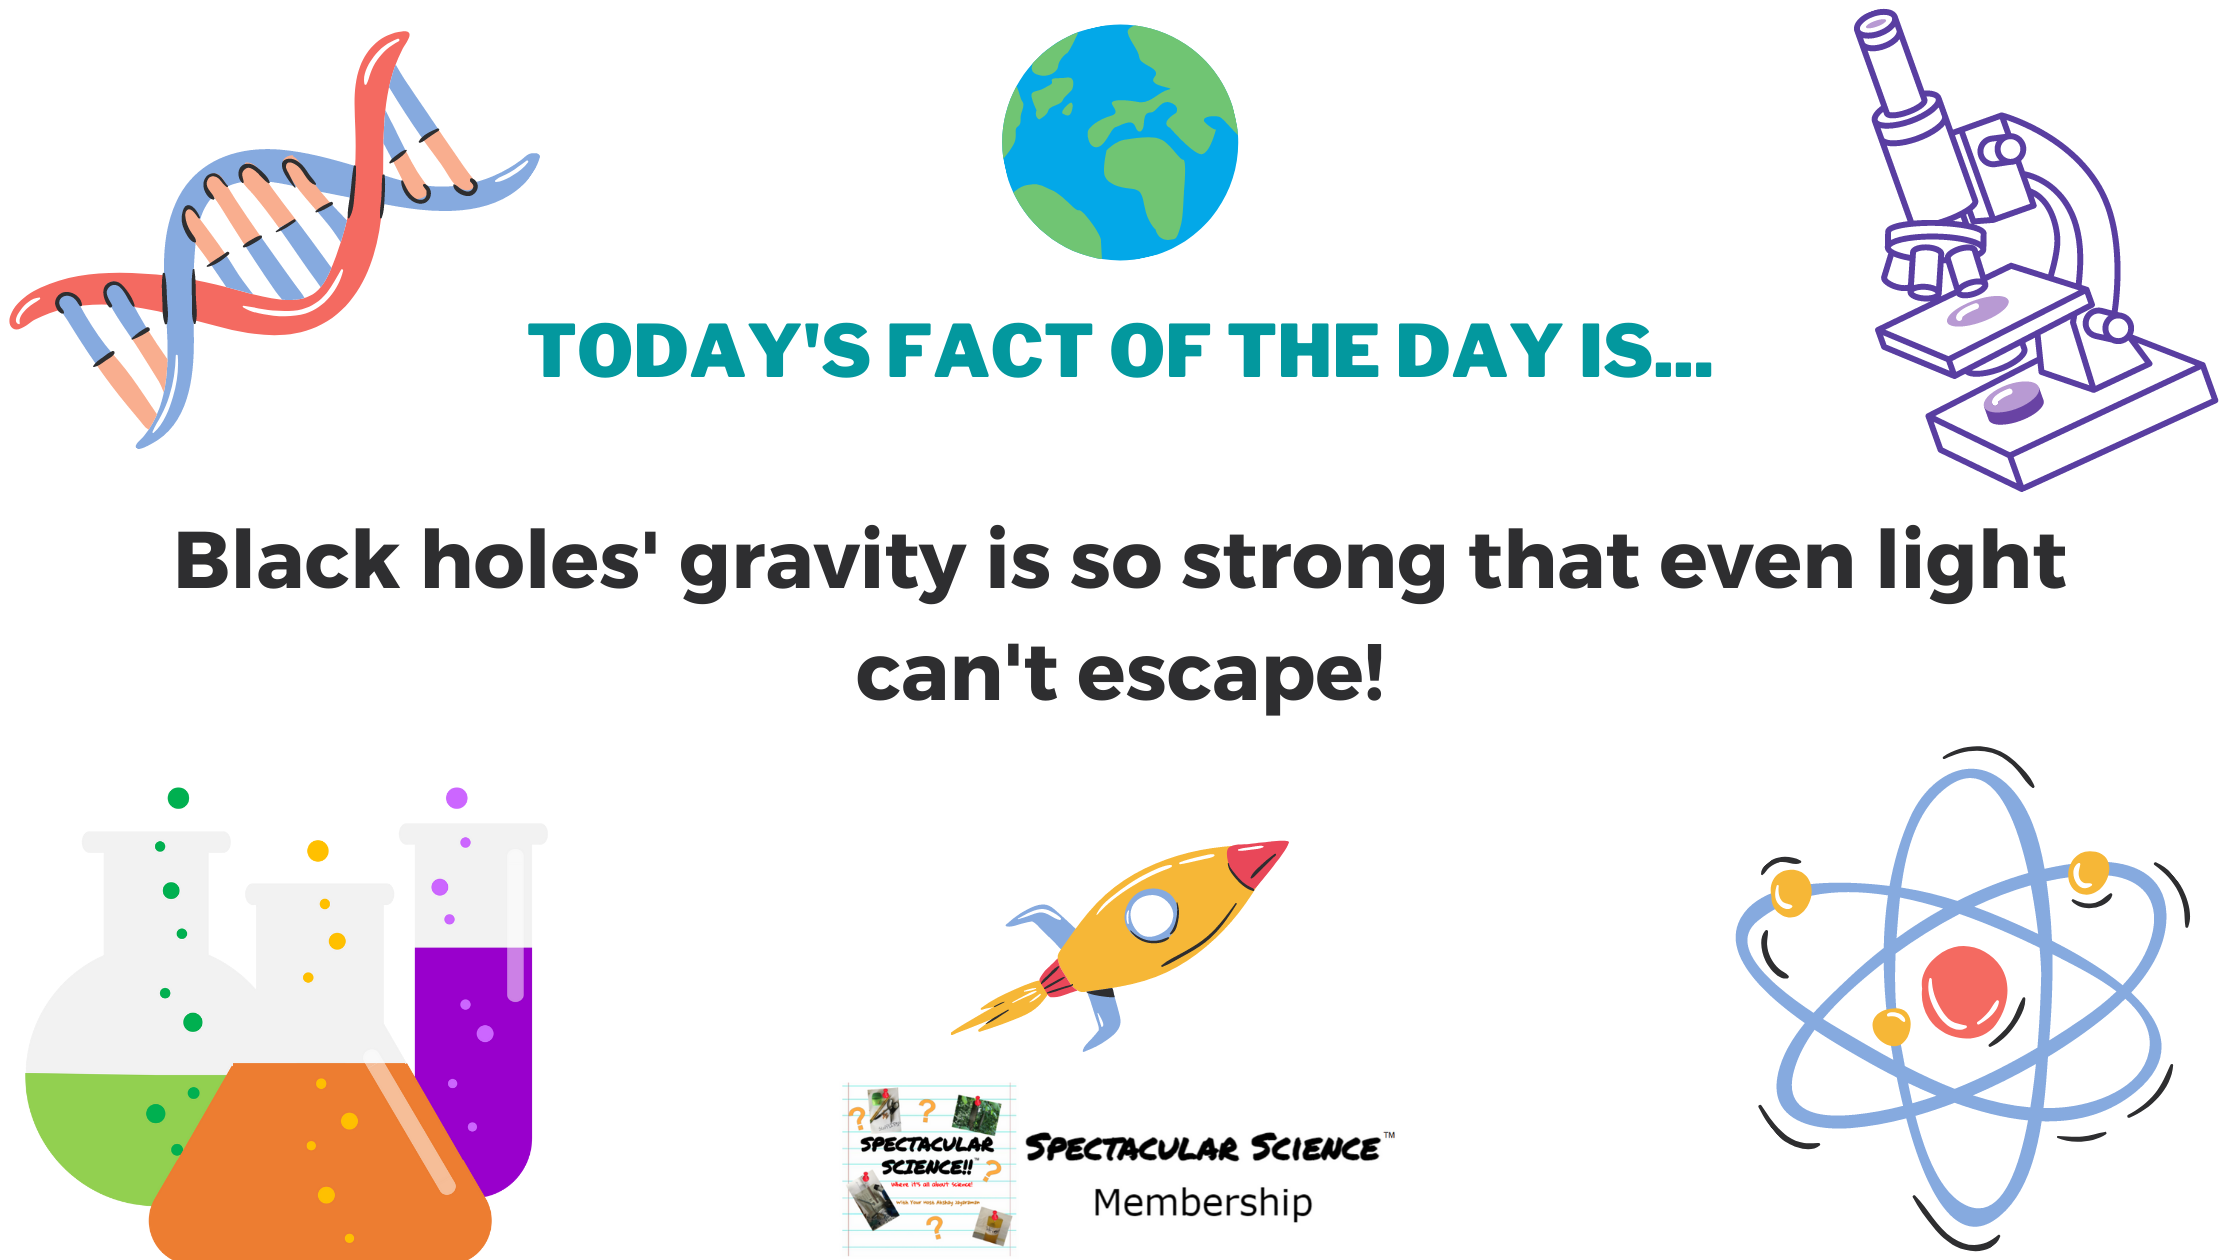 Fact of the Day Image May 16th